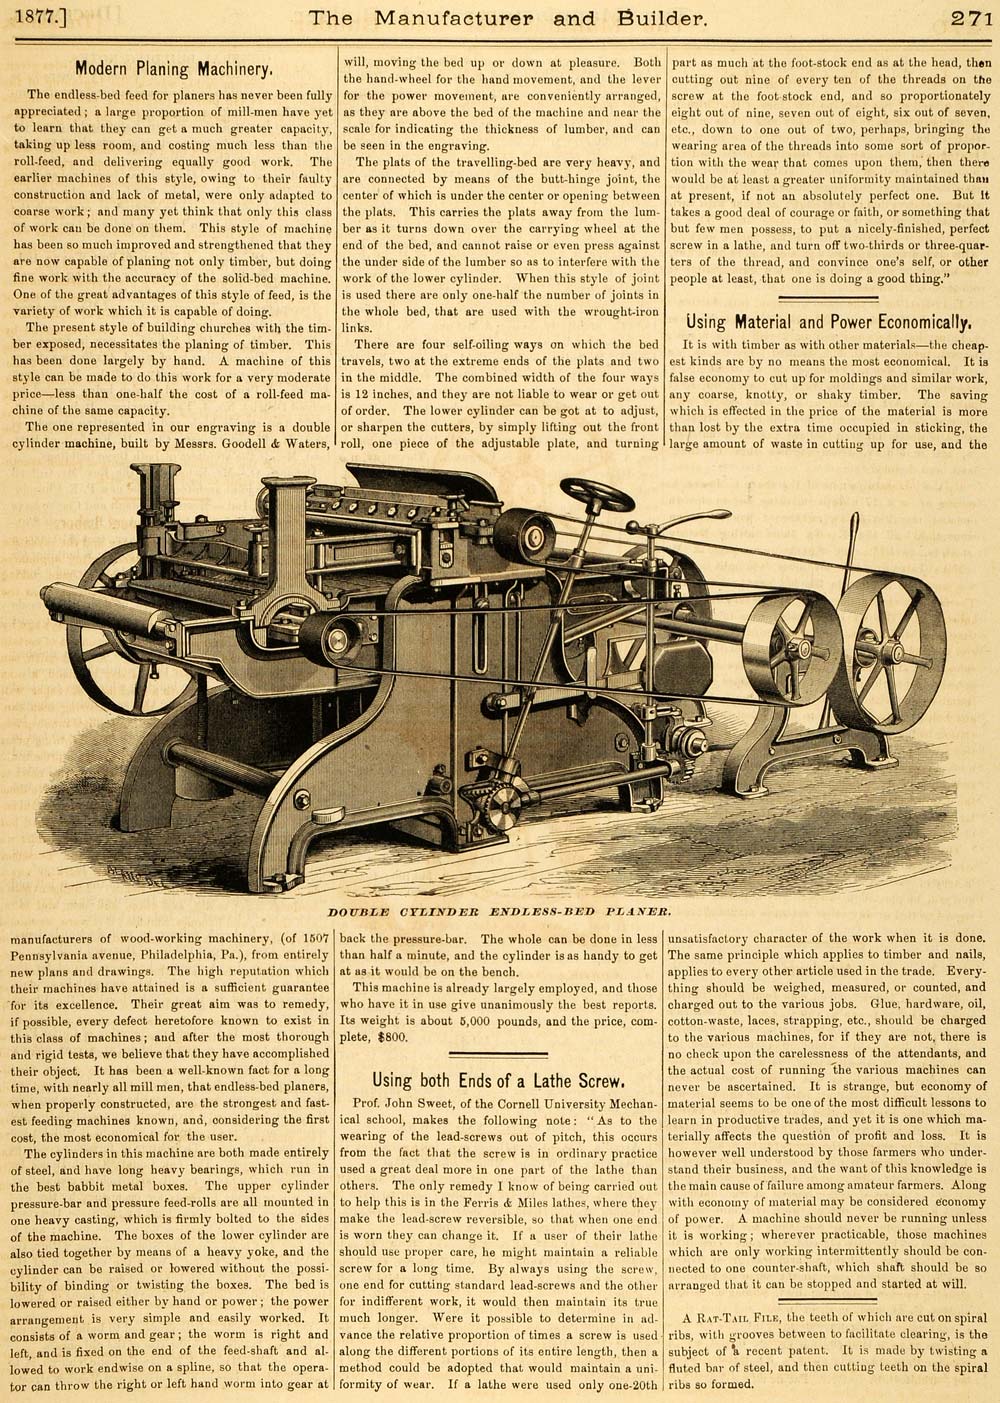 1877 Article Double Cylinder Endless-Bed Planer Antique Machine Goodell MAB1